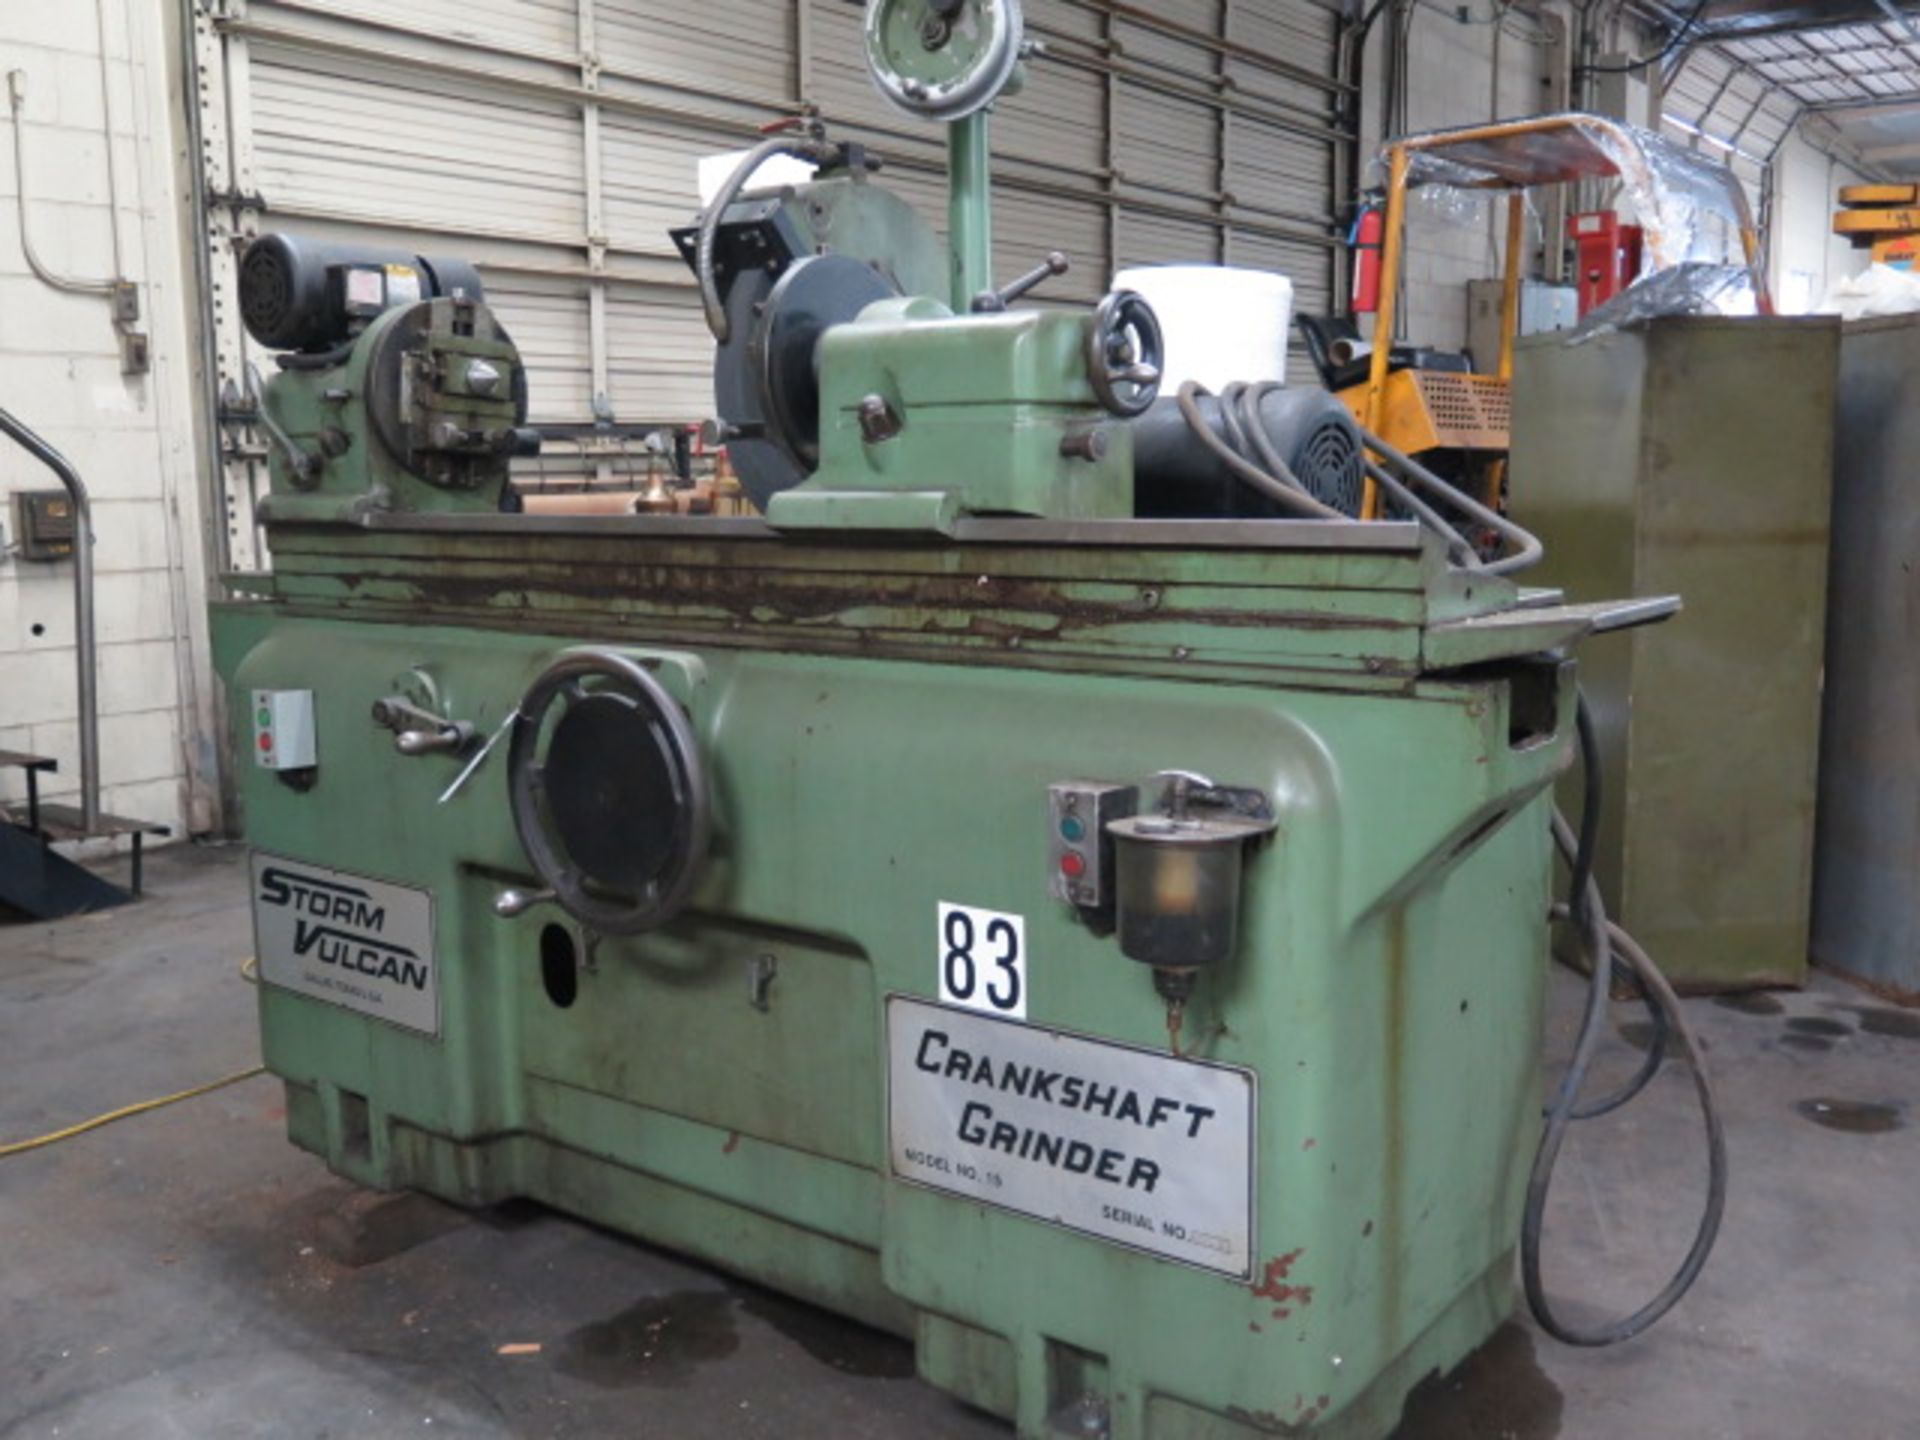 Storm Vulcan mdl. 15 Cam Shaft Grinder s/n 800-76 w/ Motorized Work Head, Tailstock, SOLD AS IS - Image 2 of 16